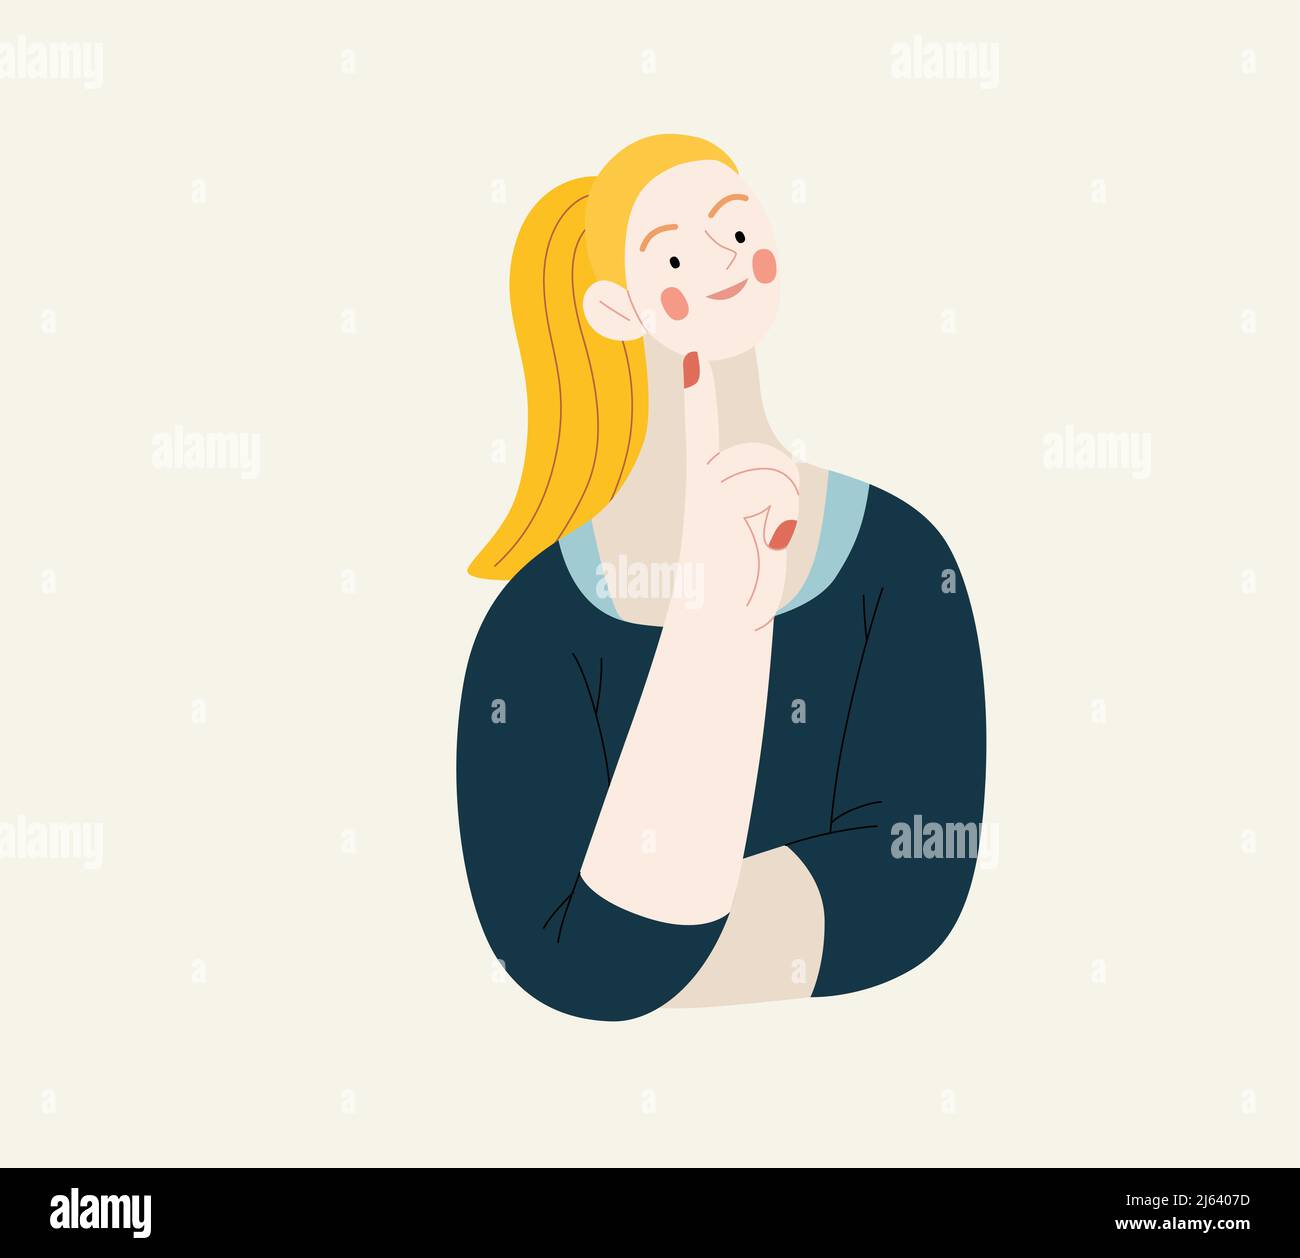 People portrait - Thinking people -Modern flat vector concept illustration of a young man thinking about something, half-length portrait, user avatar. Stock Vector